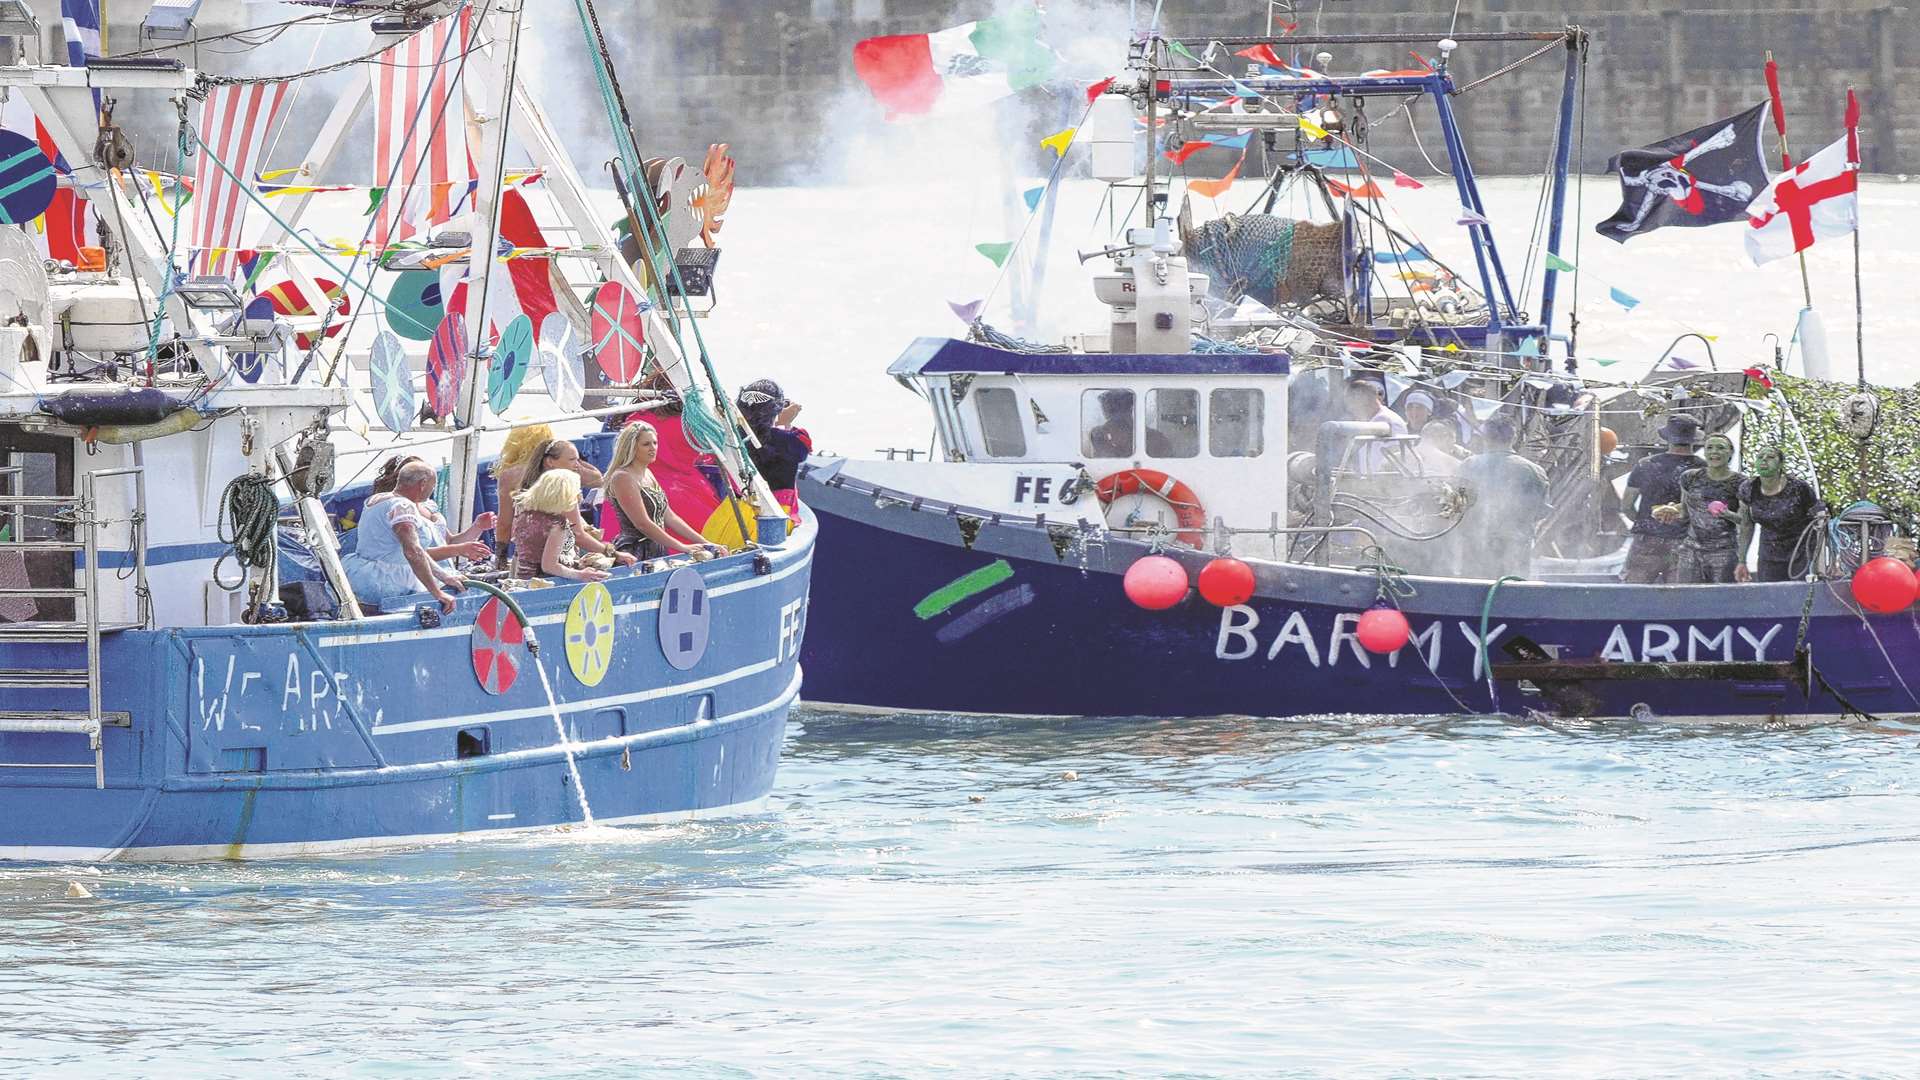 Last year's winning boat Barmy Army in action. Picture: Wayne McCabe/KM Group